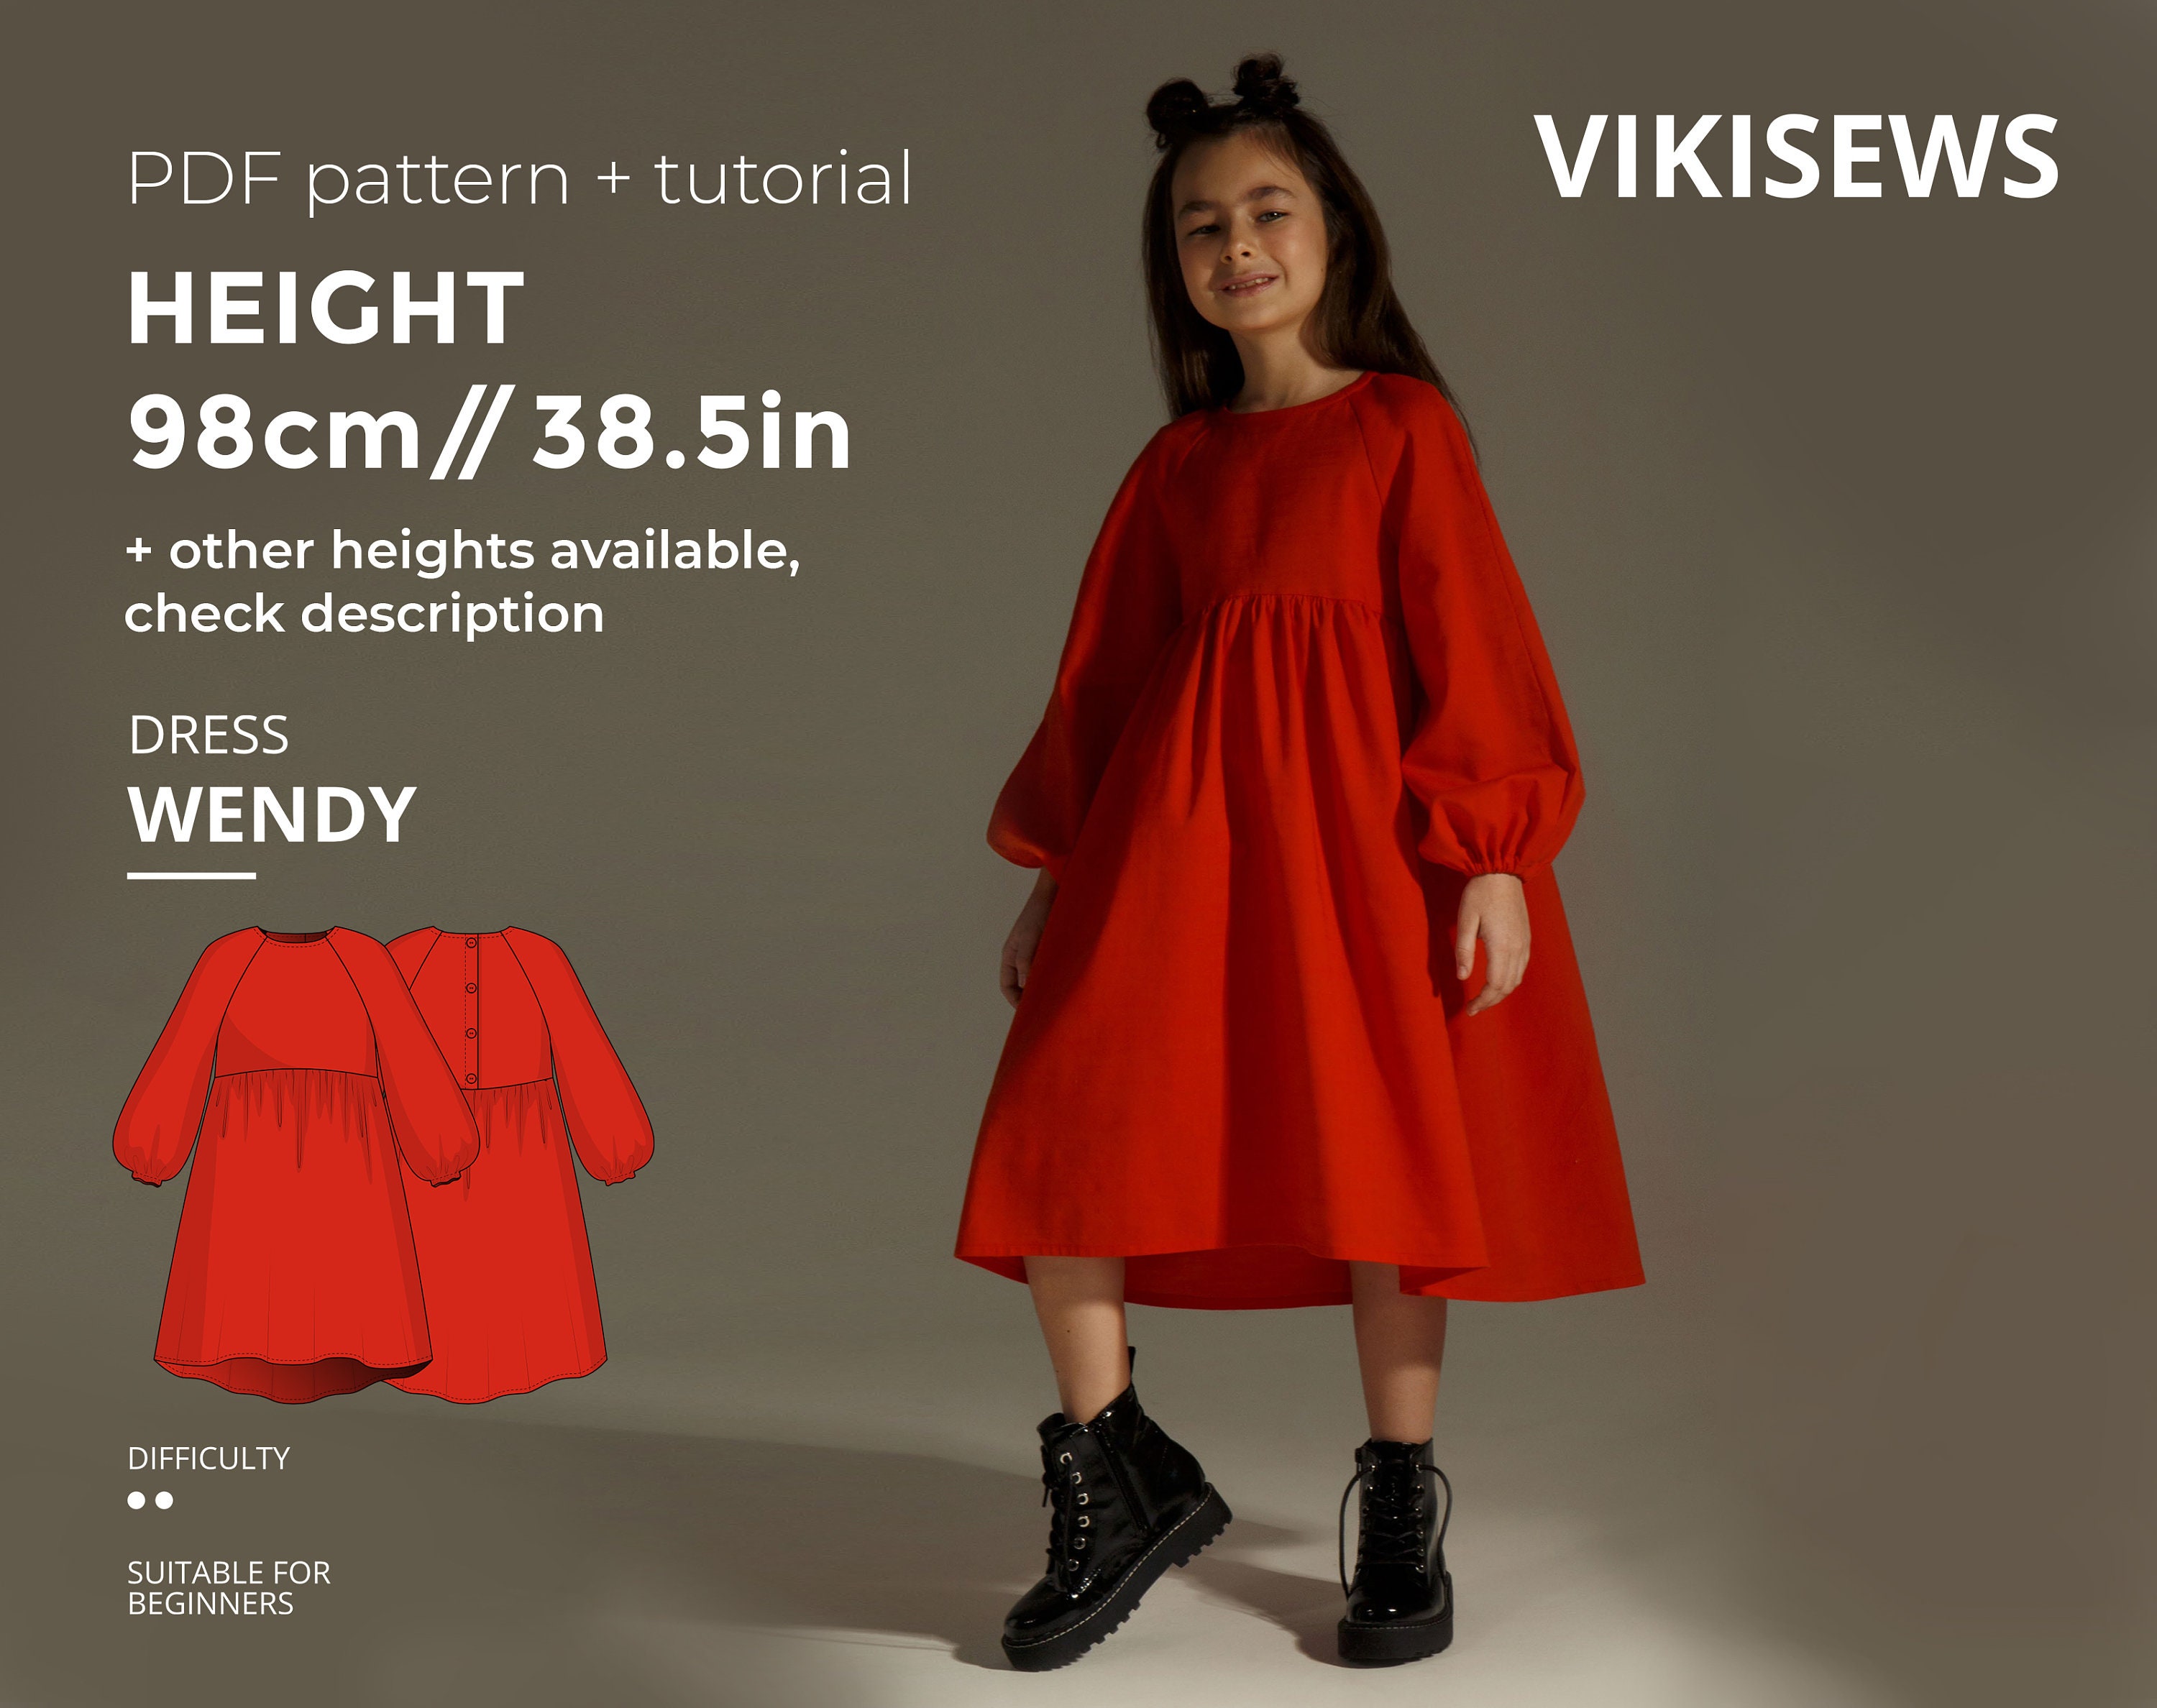 Wendy Dress Pattern With Pdf Tutorial Height 38.5 in 98 Cm 